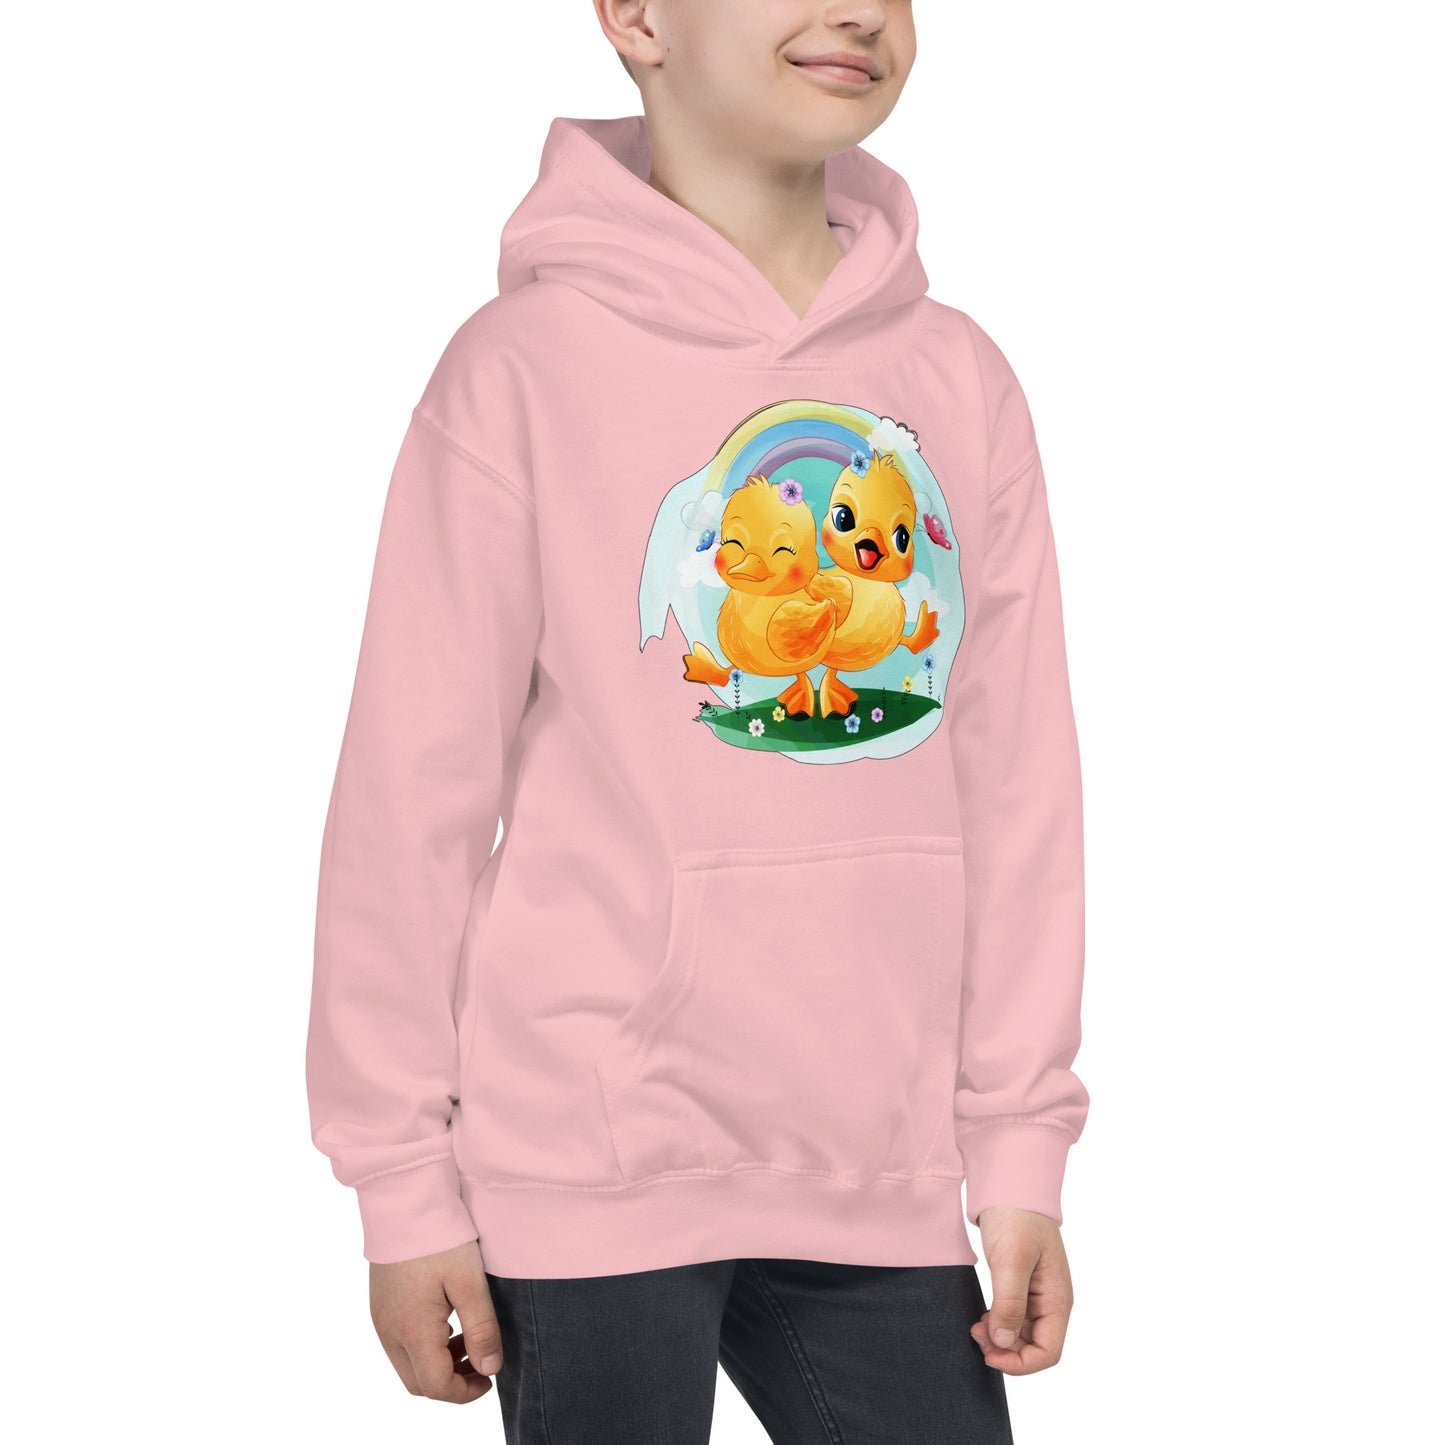 Lovely Ducky's Hoodie, No. 0075